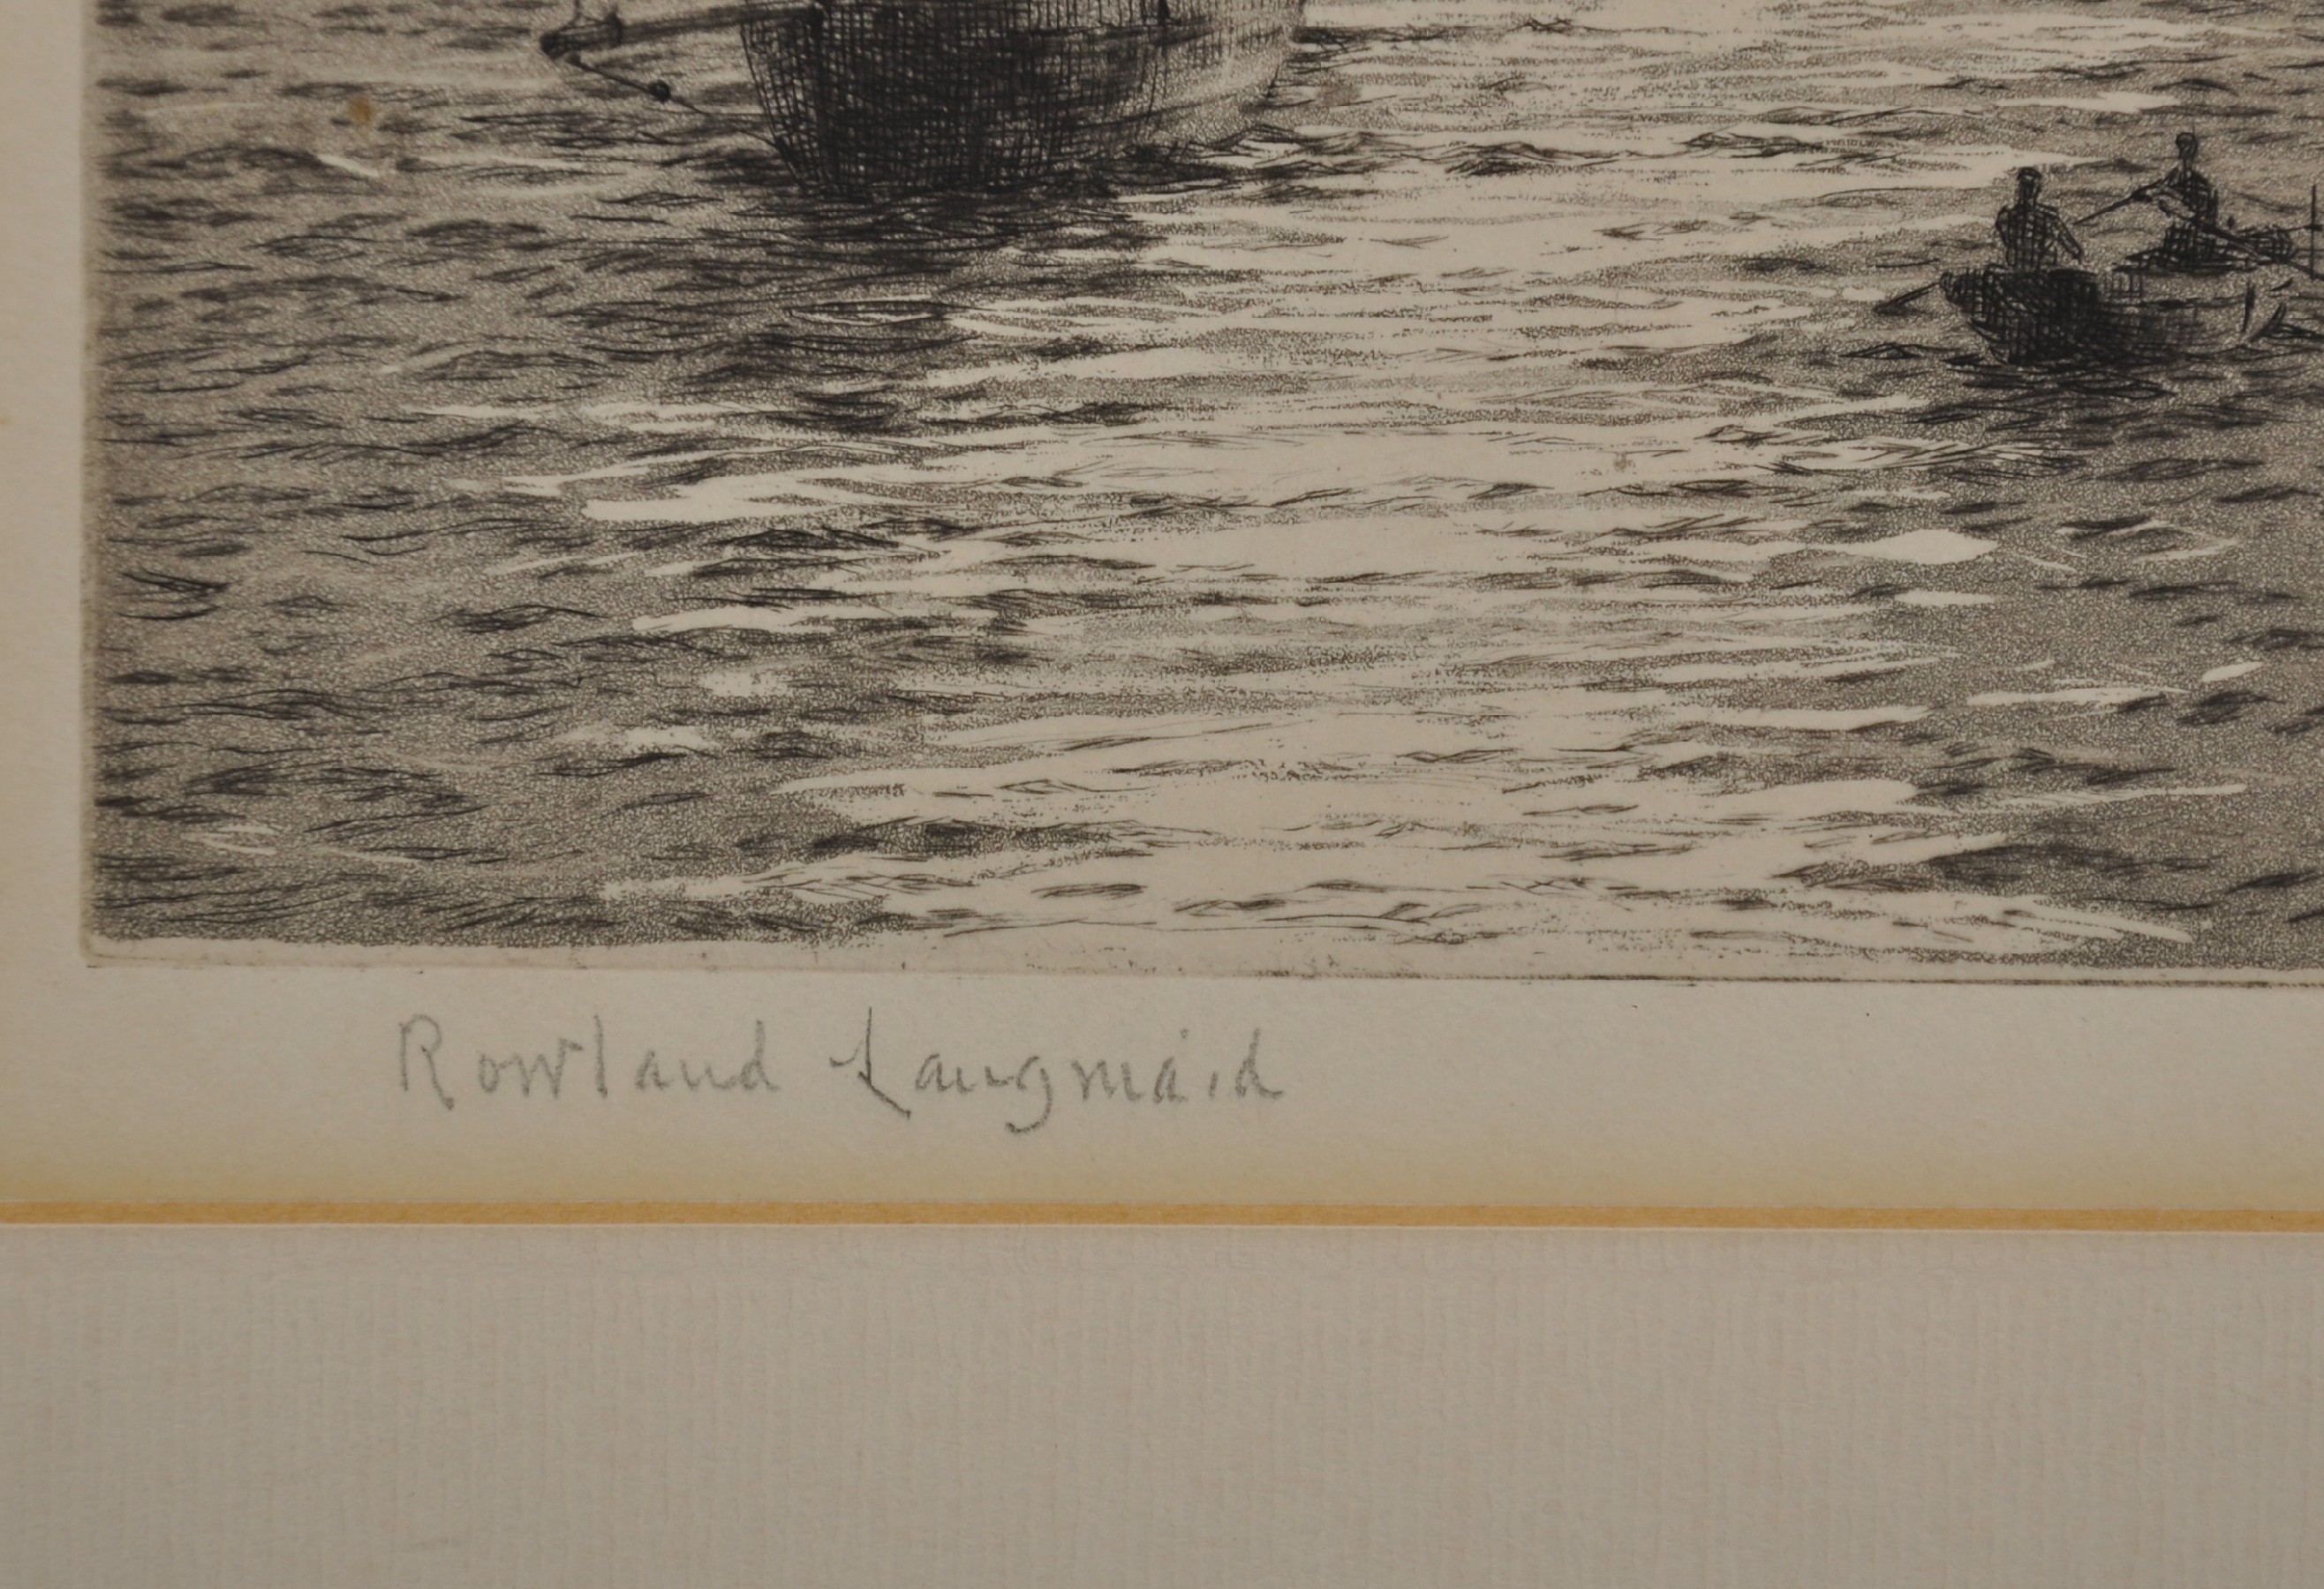 Rowland Langmaid (1897-1956) British. "Spitshead Forts' in Portsmouth", Etching, Signed in Pencil, - Image 3 of 5